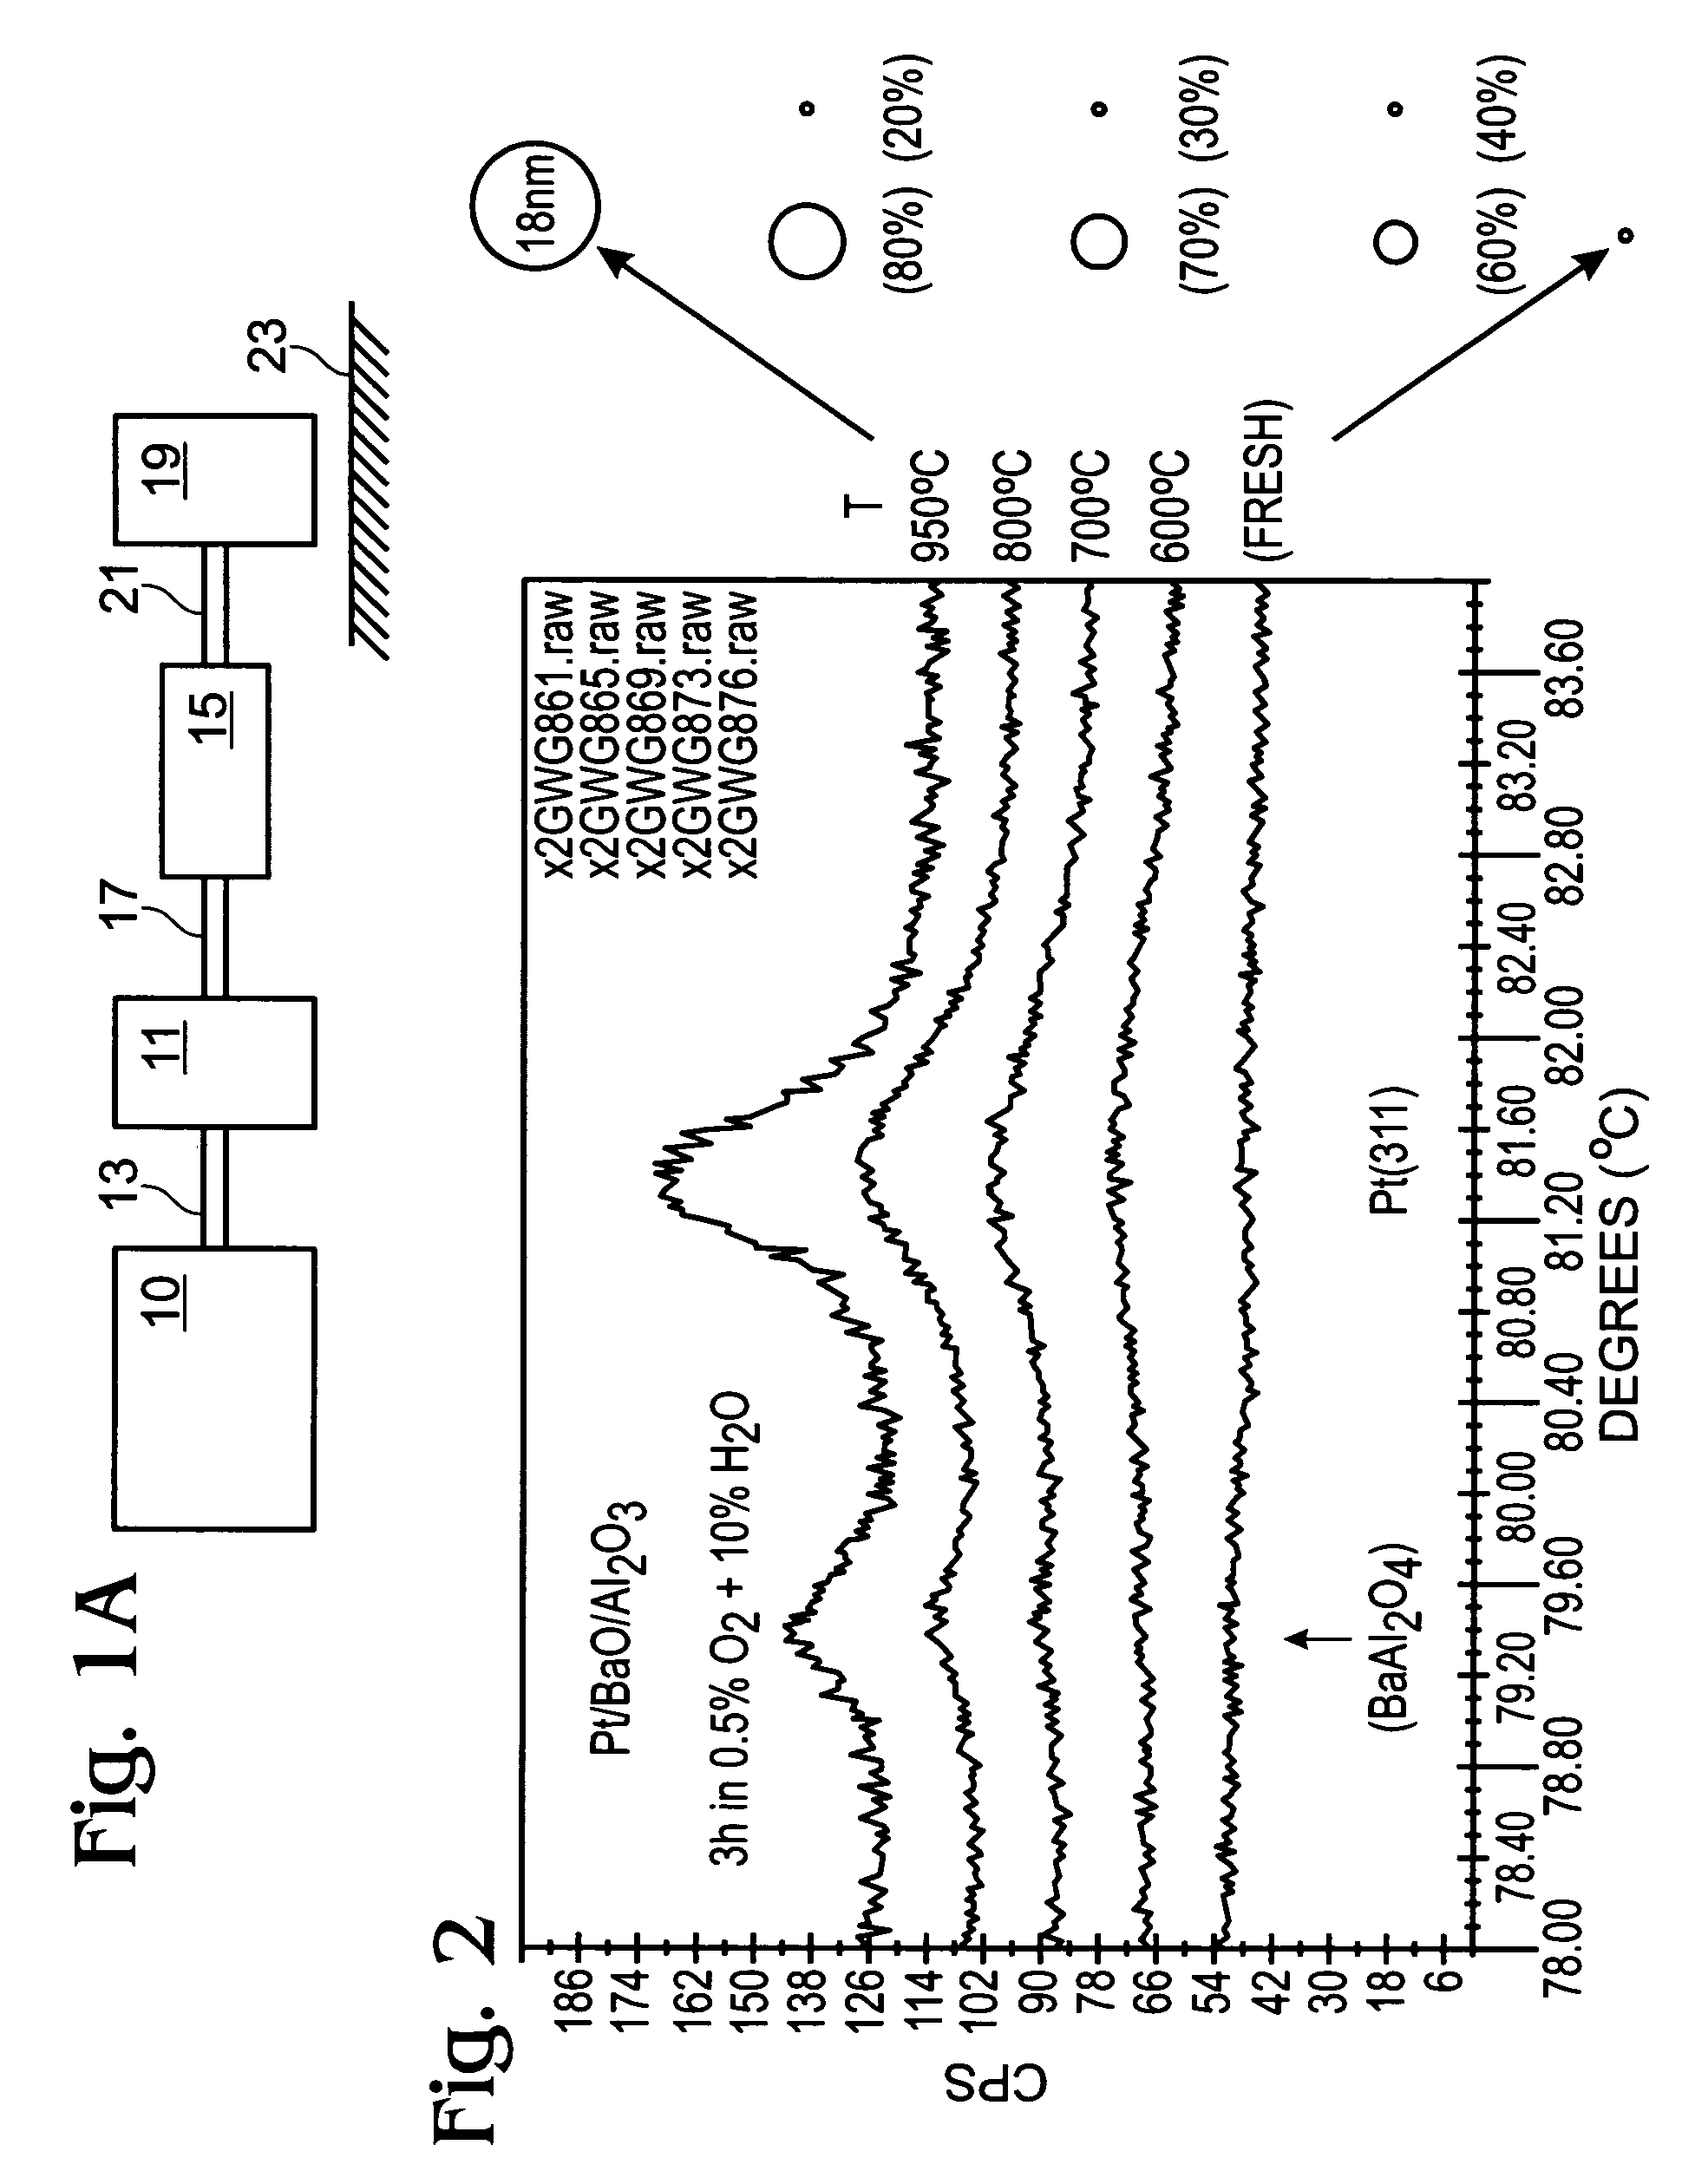 Computer device to control operation during catalyst desulfurization to preserve catalytic function